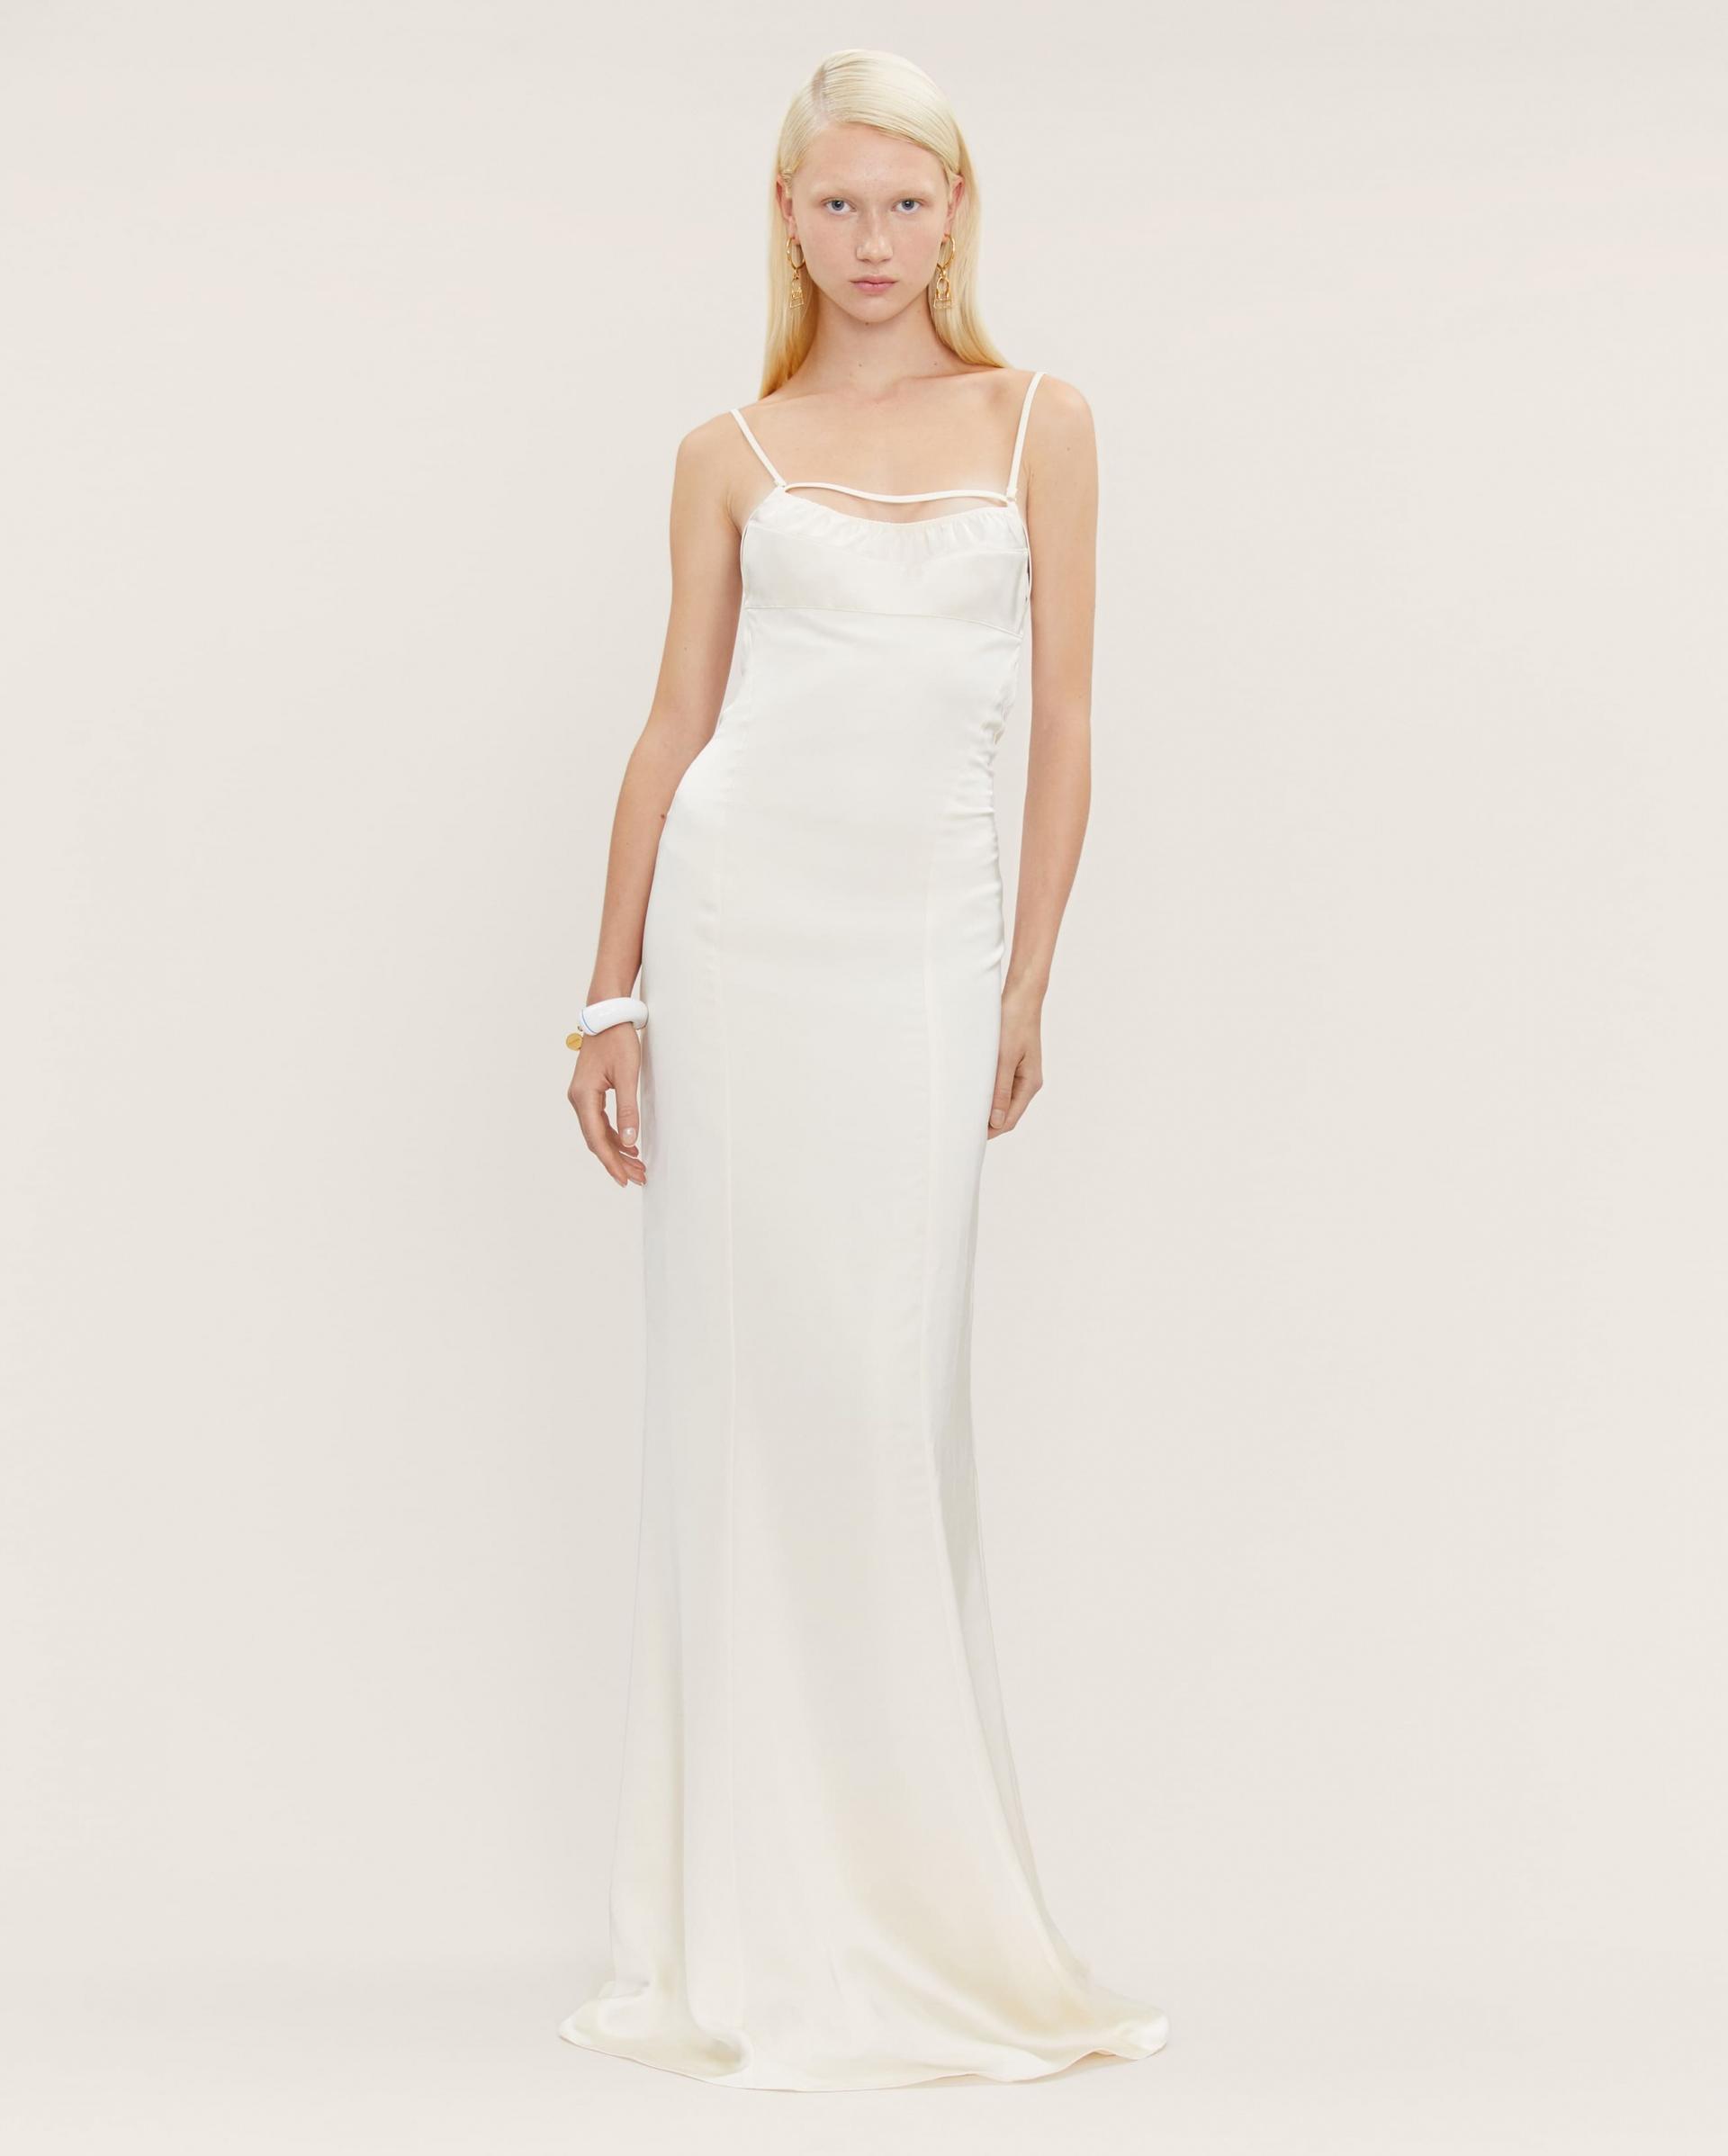 39 Beautiful Beach Wedding Dresses for 2021 - hitched.co.uk - hitched.co.uk